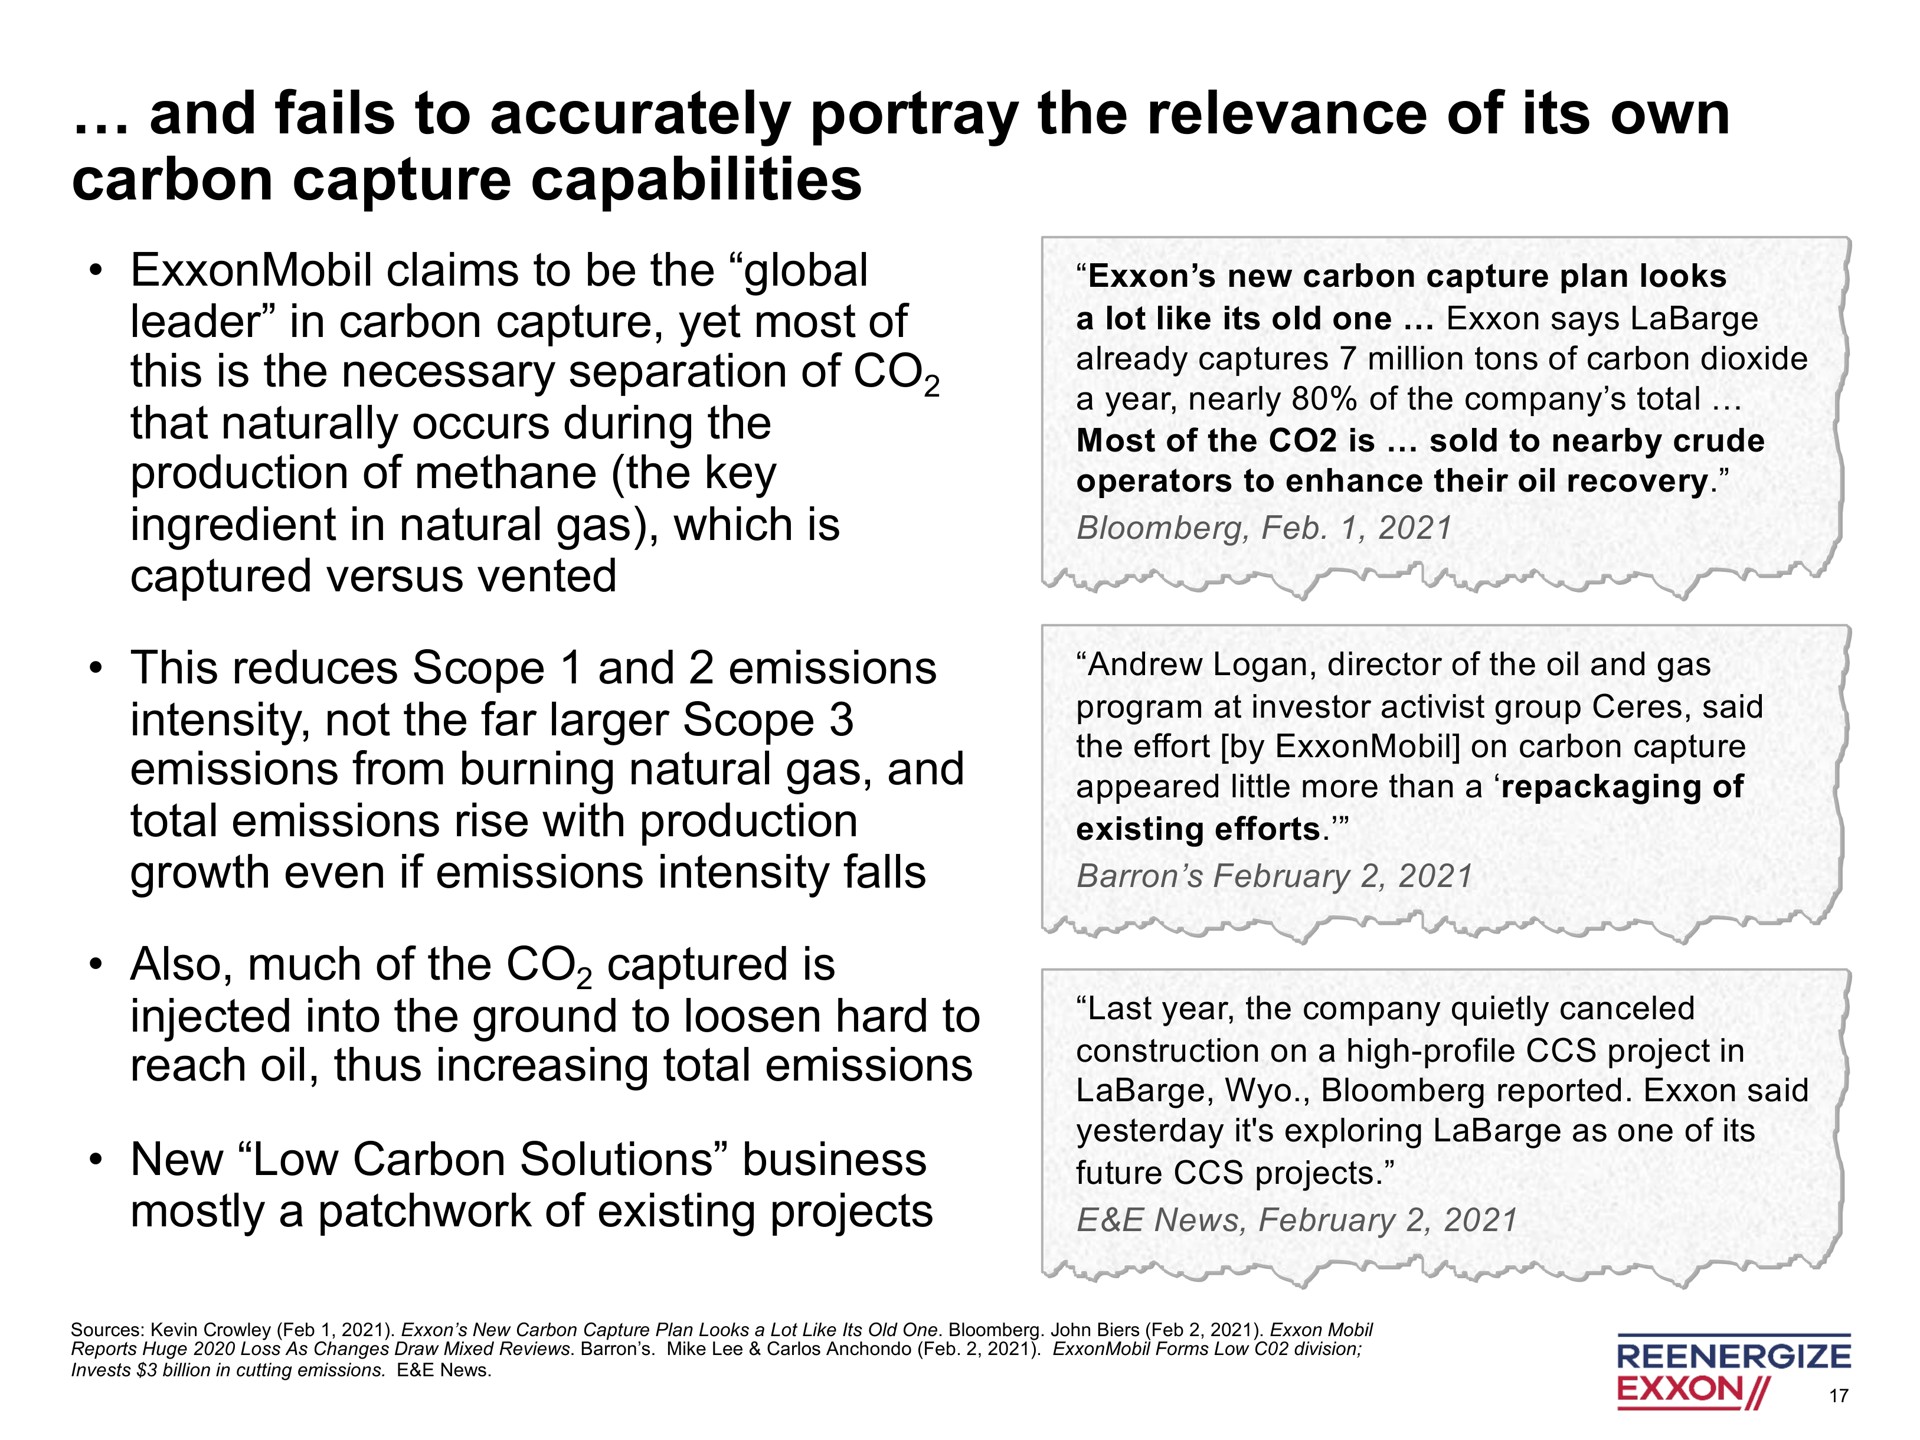 and fails to accurately portray the relevance of its own carbon capture capabilities | Engine No. 1